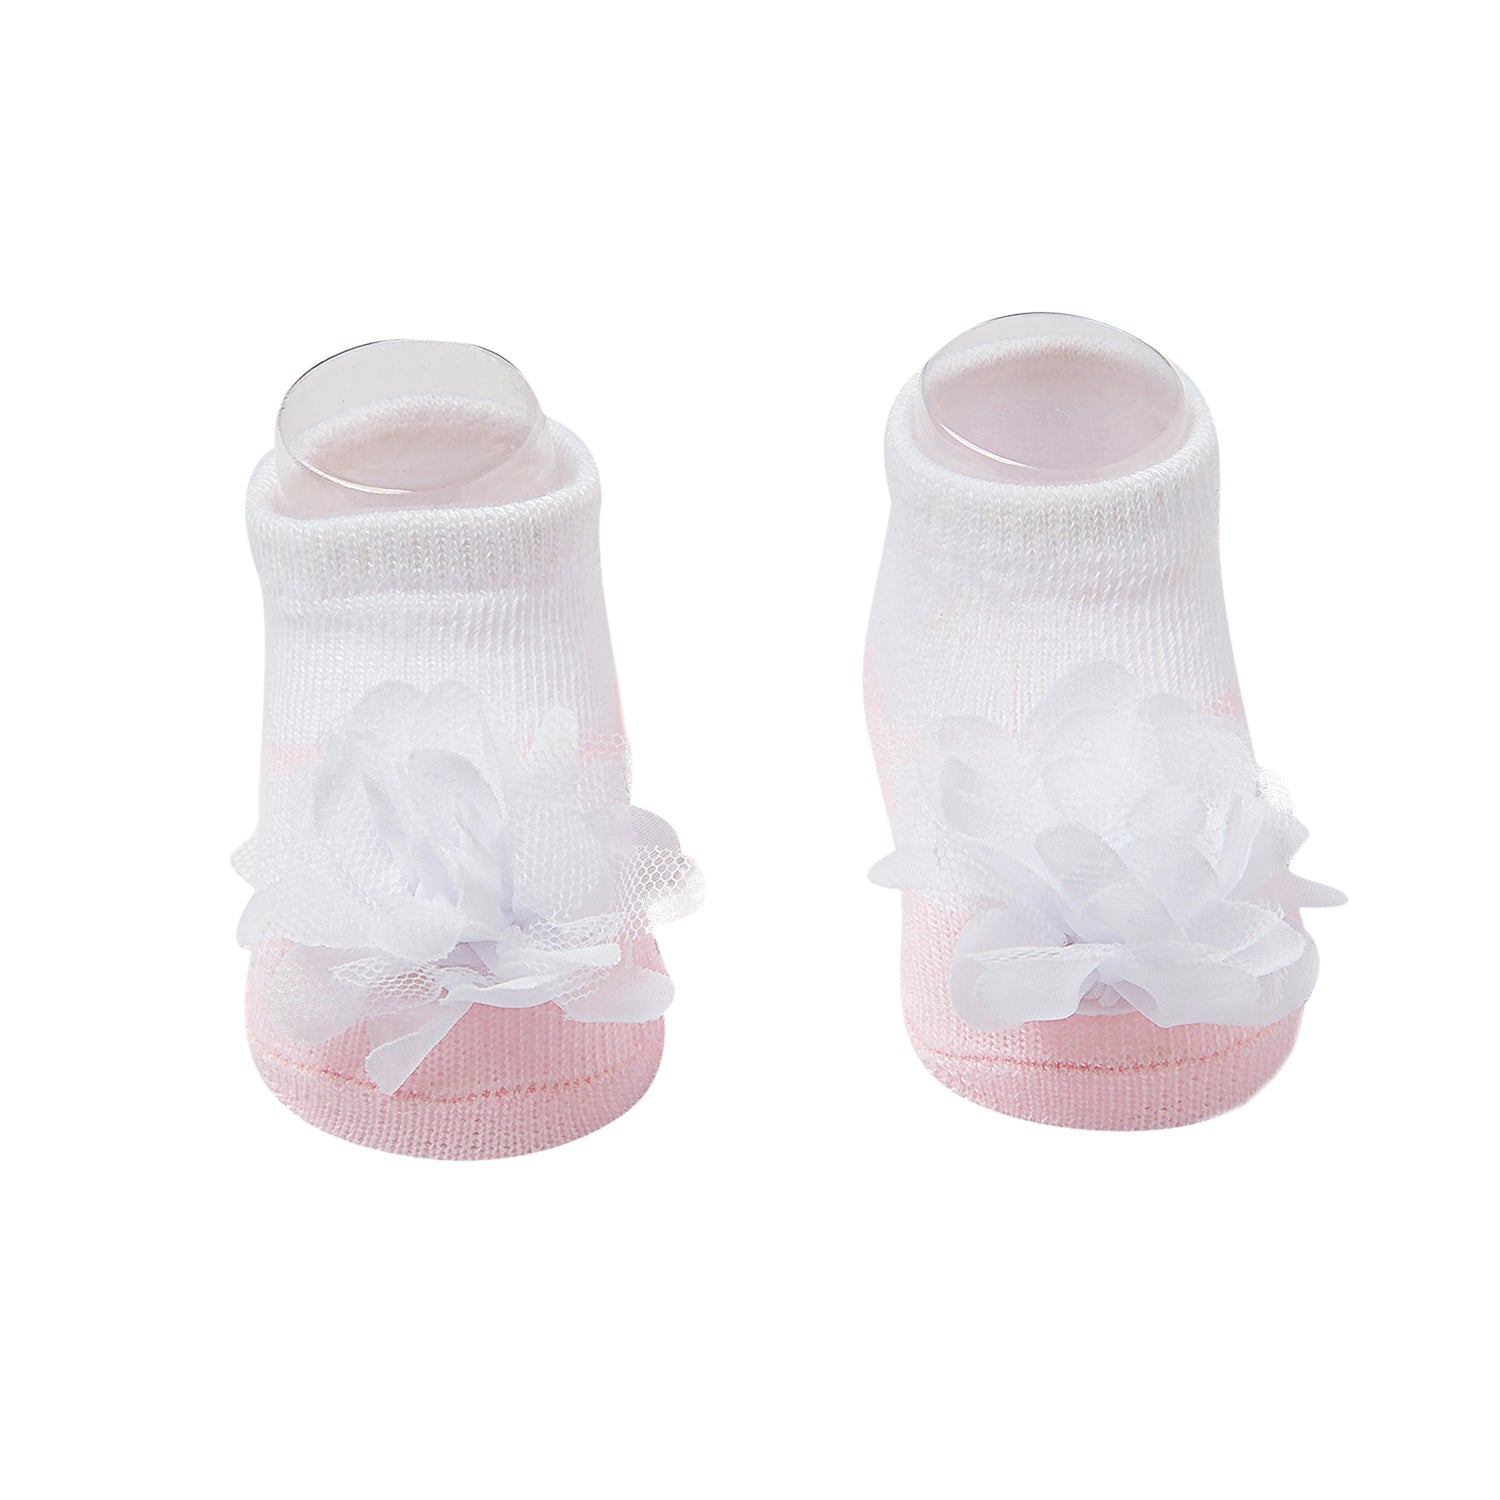 Floral White Socks And Cap Set - Baby Moo